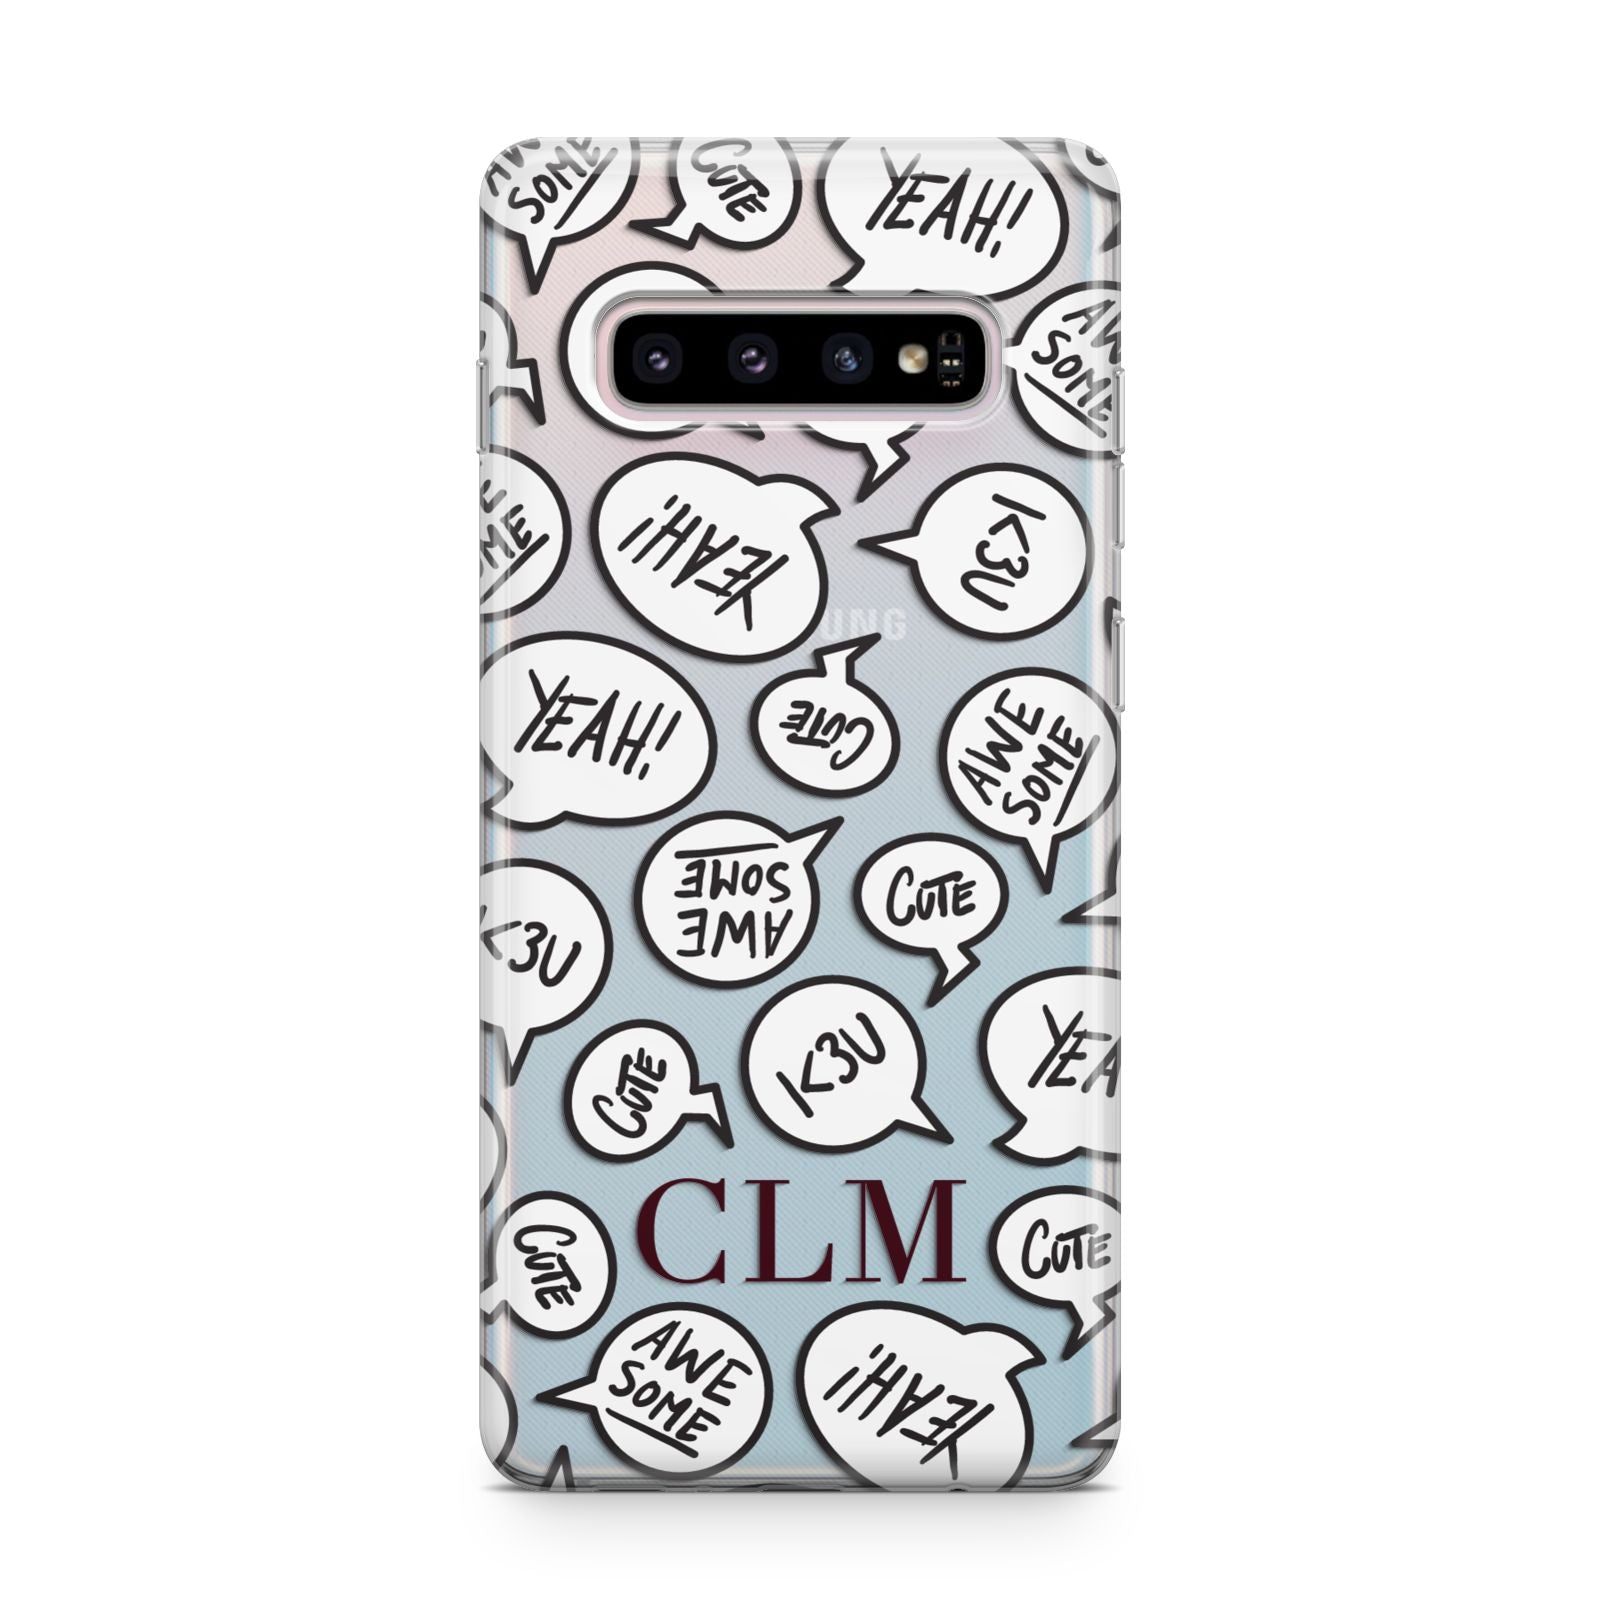 Personalised Sayings With Initials Samsung Galaxy S10 Plus Case